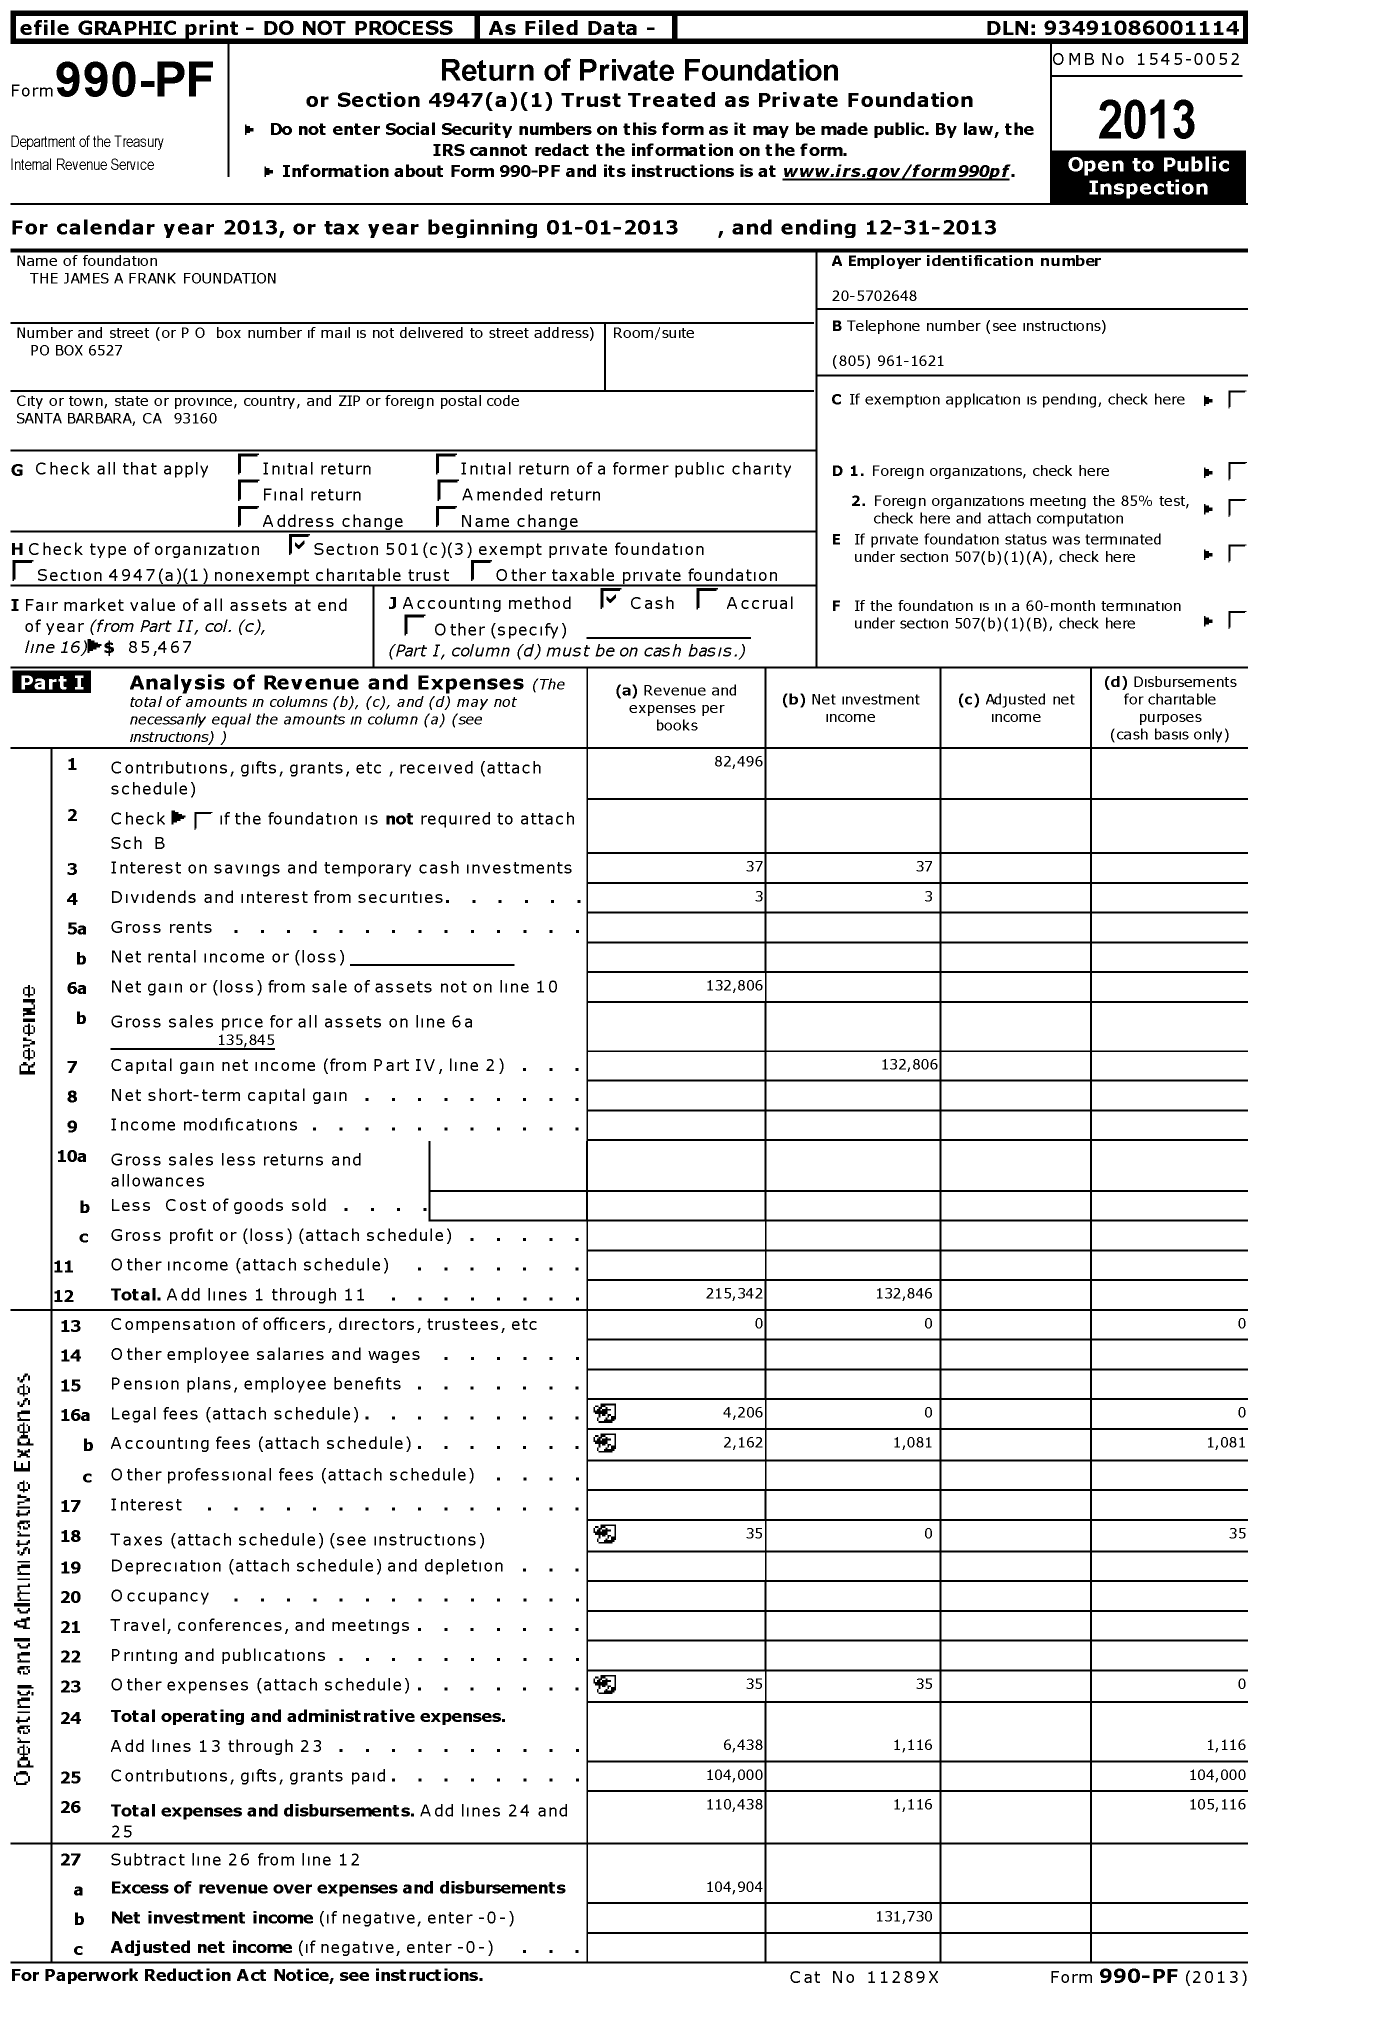 Image of first page of 2013 Form 990PF for The James A Frank Foundation